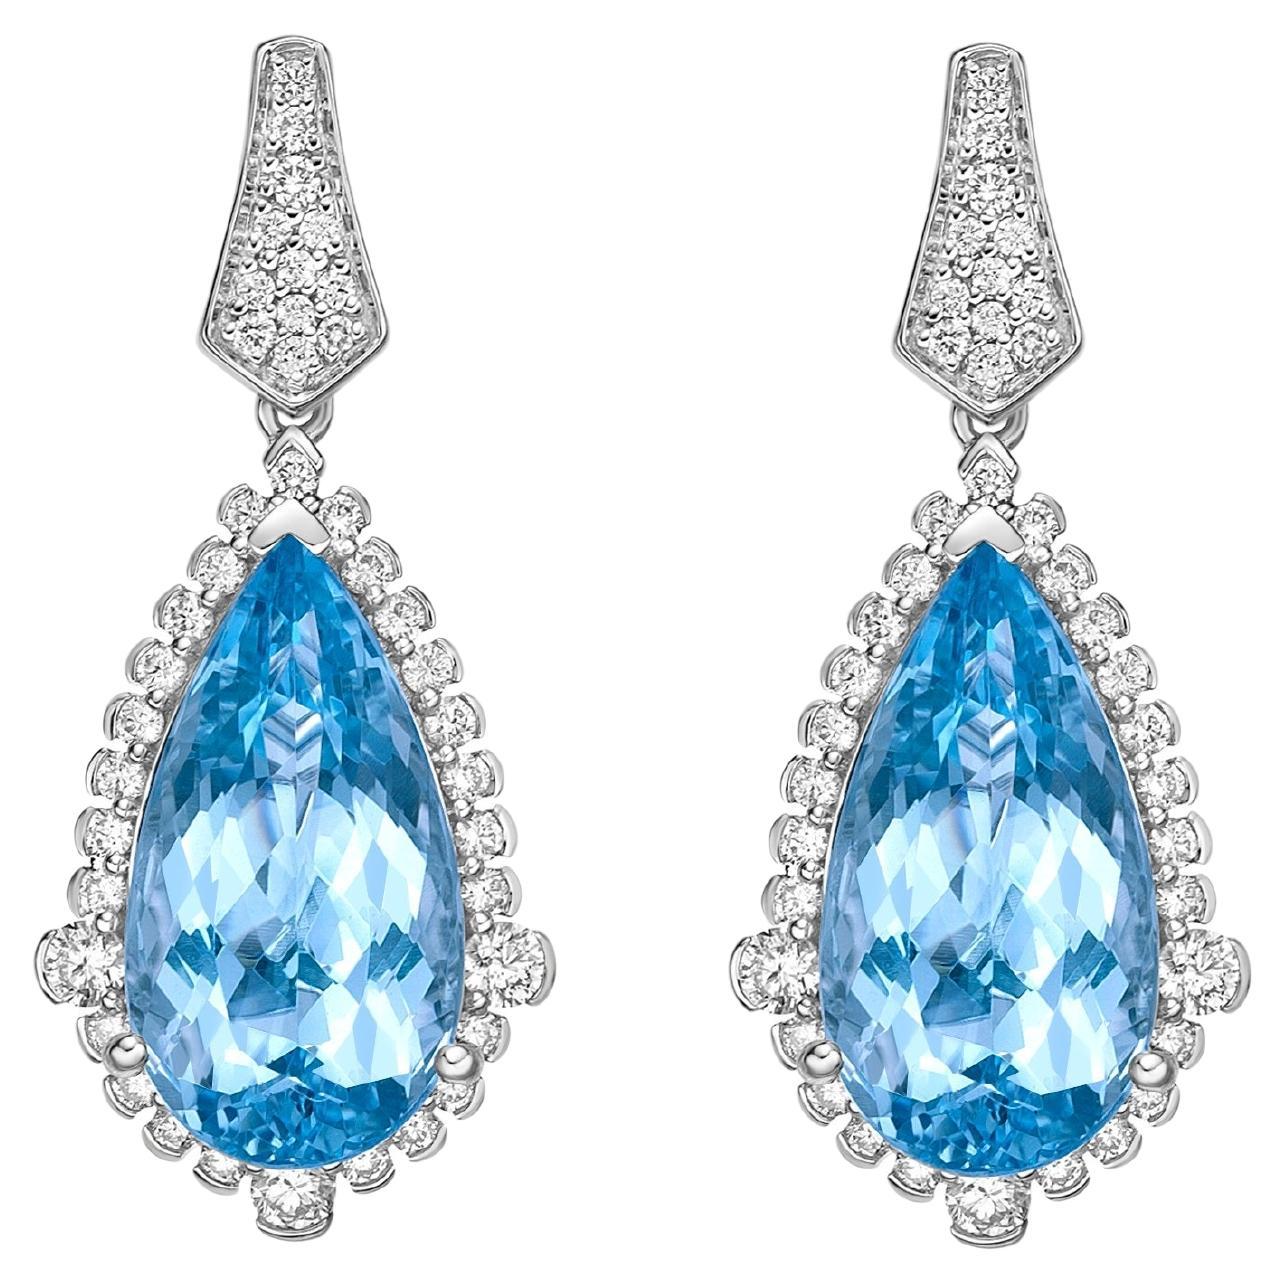 7.29 Carat Aquamarine Drop Earrings in 18Karat White Gold with White Diamond. For Sale